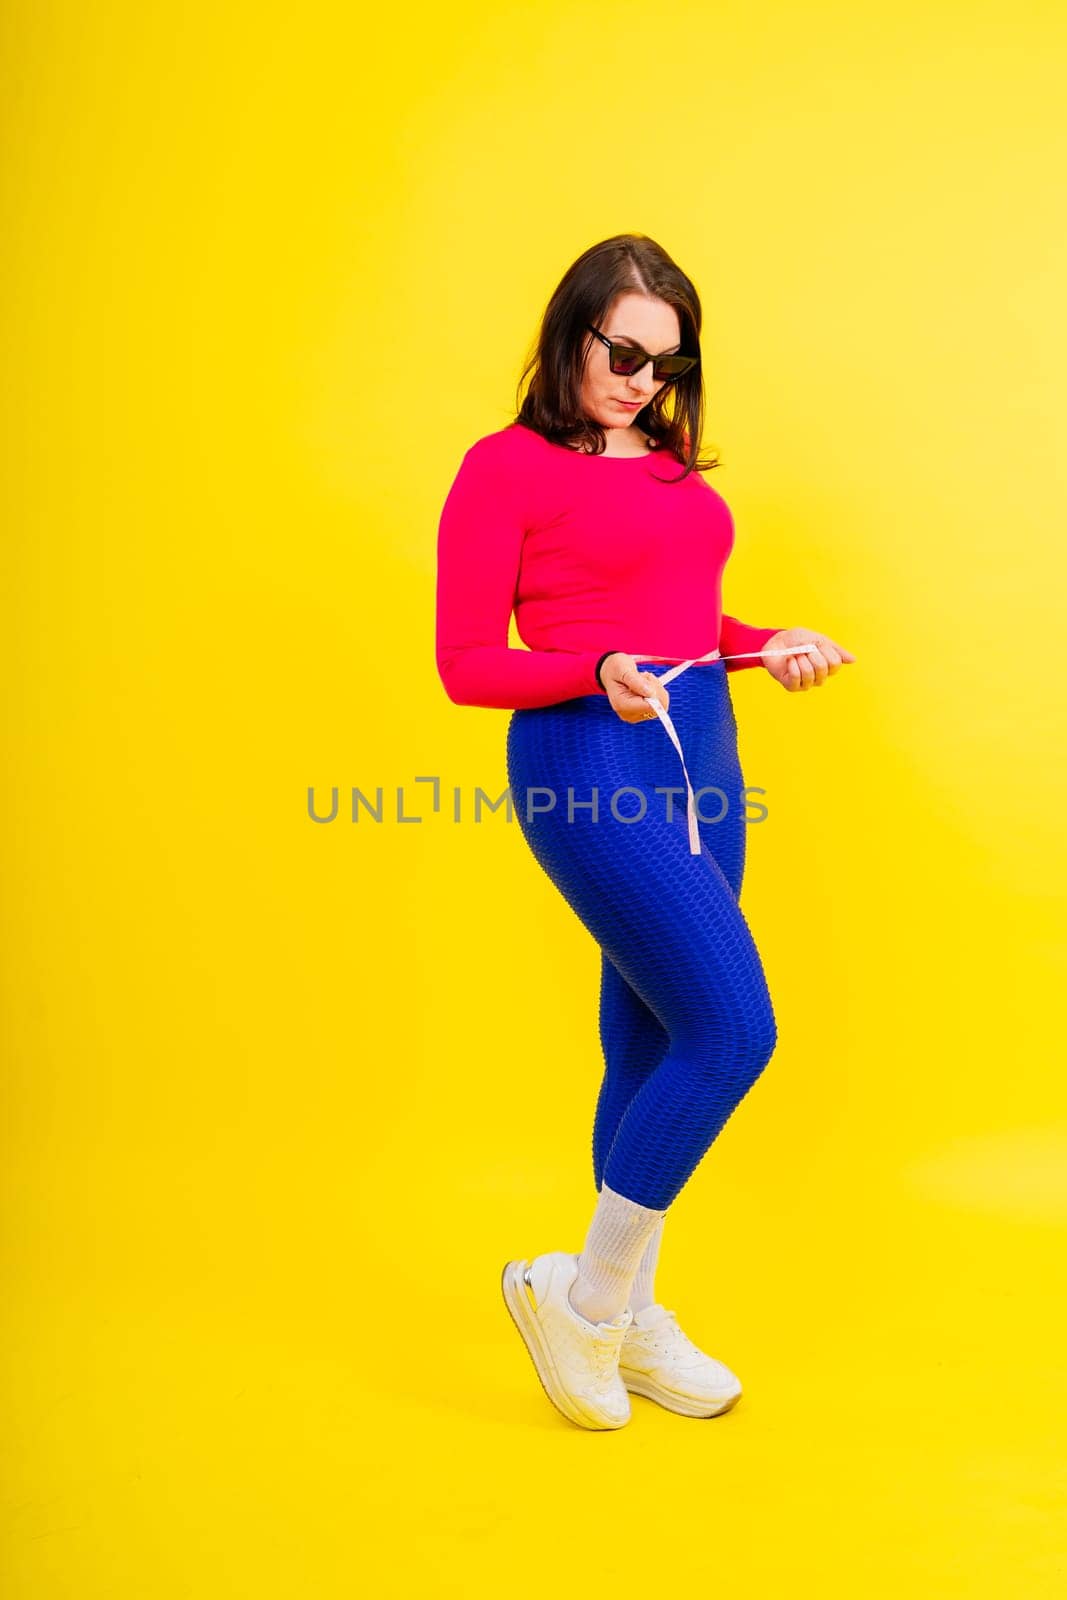 Overweight woman measuring waist before weight loss in a studio shot on yellow background